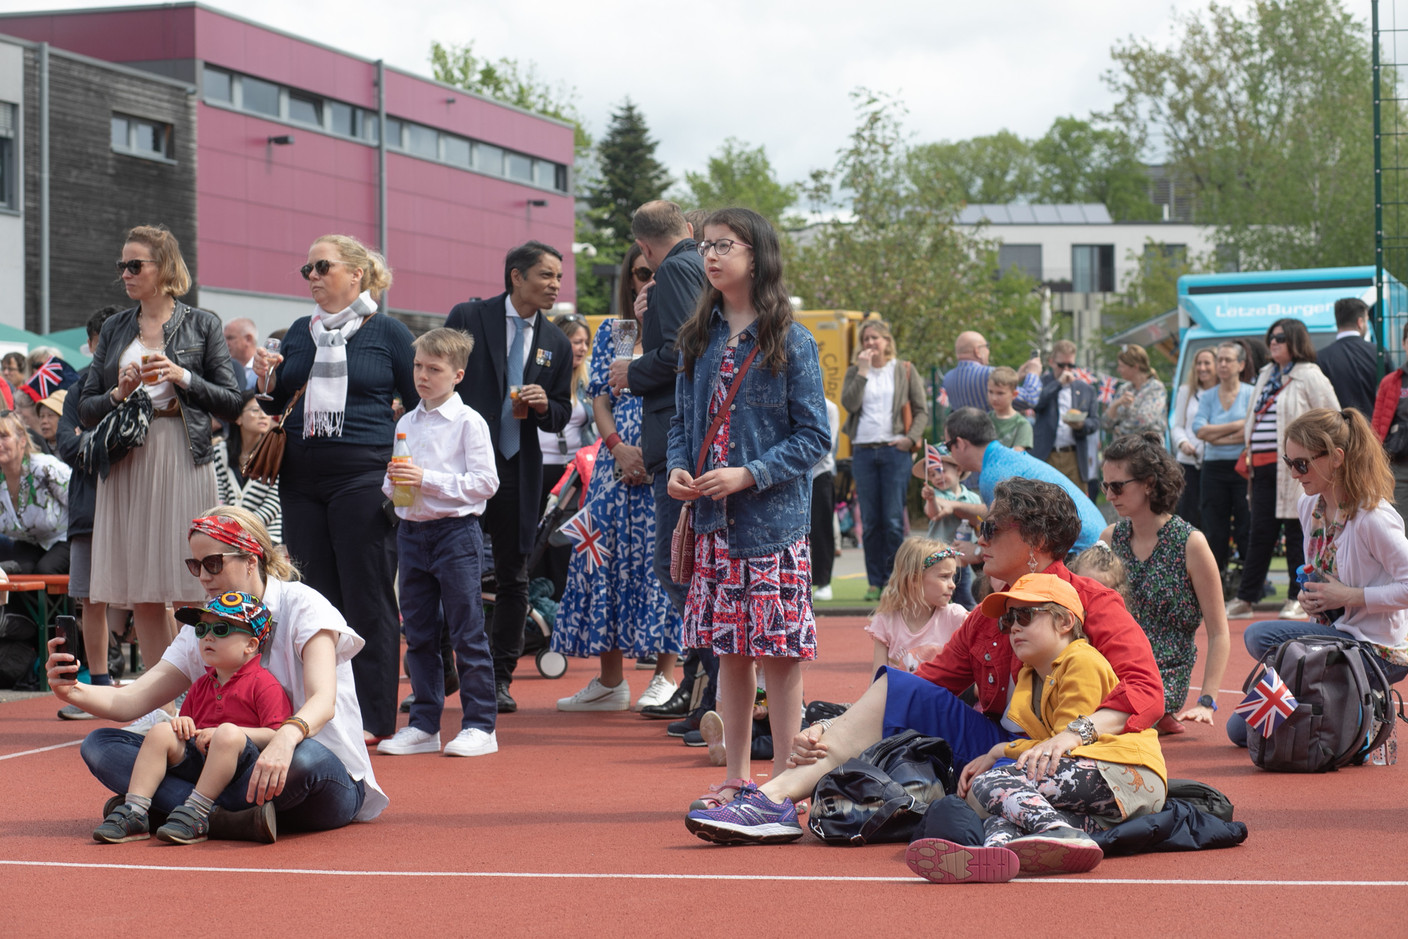 Attendees watching the coronation of King Charles III and Queen Camilla, which was shown on big screens at St George’s International School in Luxembourg on 6 May 2023. Photo: Matic Zorman / Maison Moderne